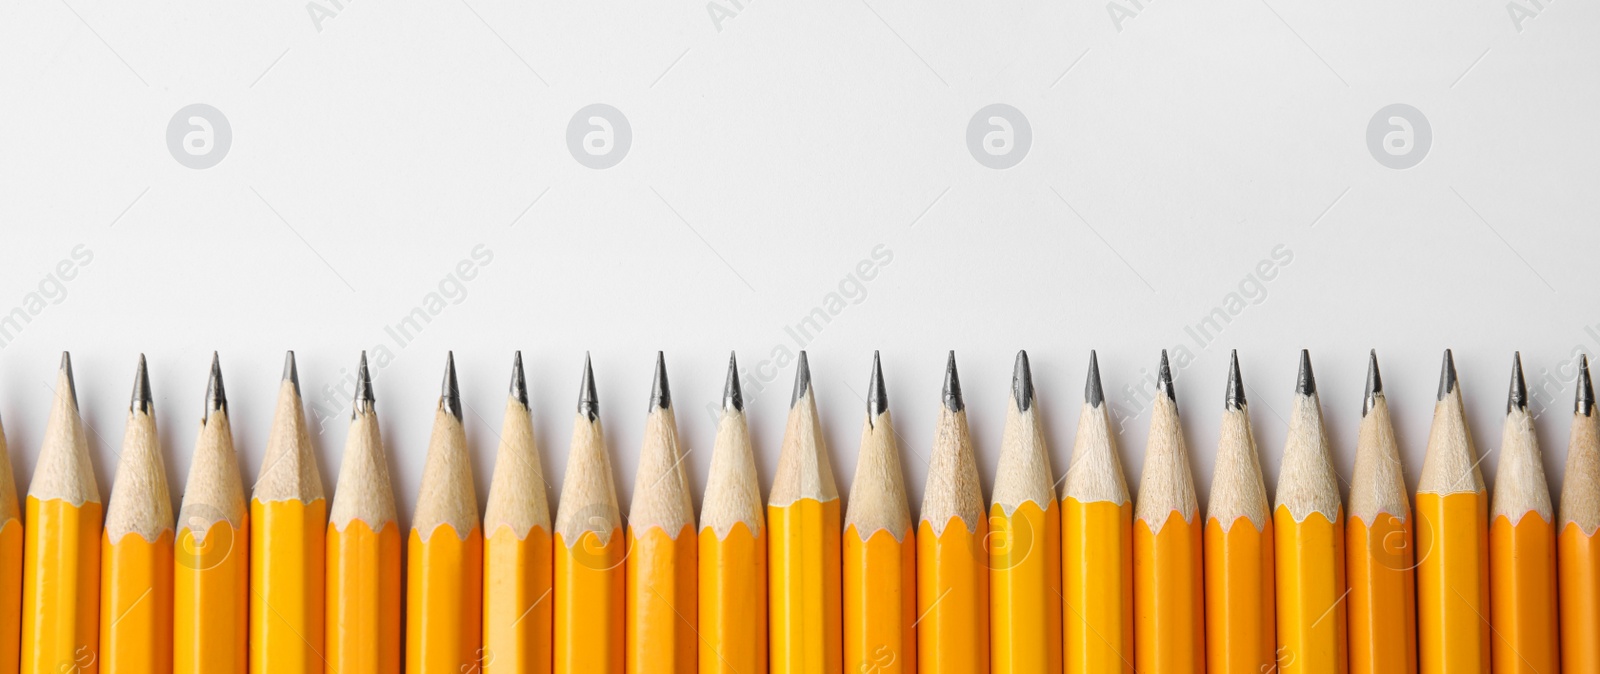 Image of Sharp pencils on white background, top view with space for text. Banner design